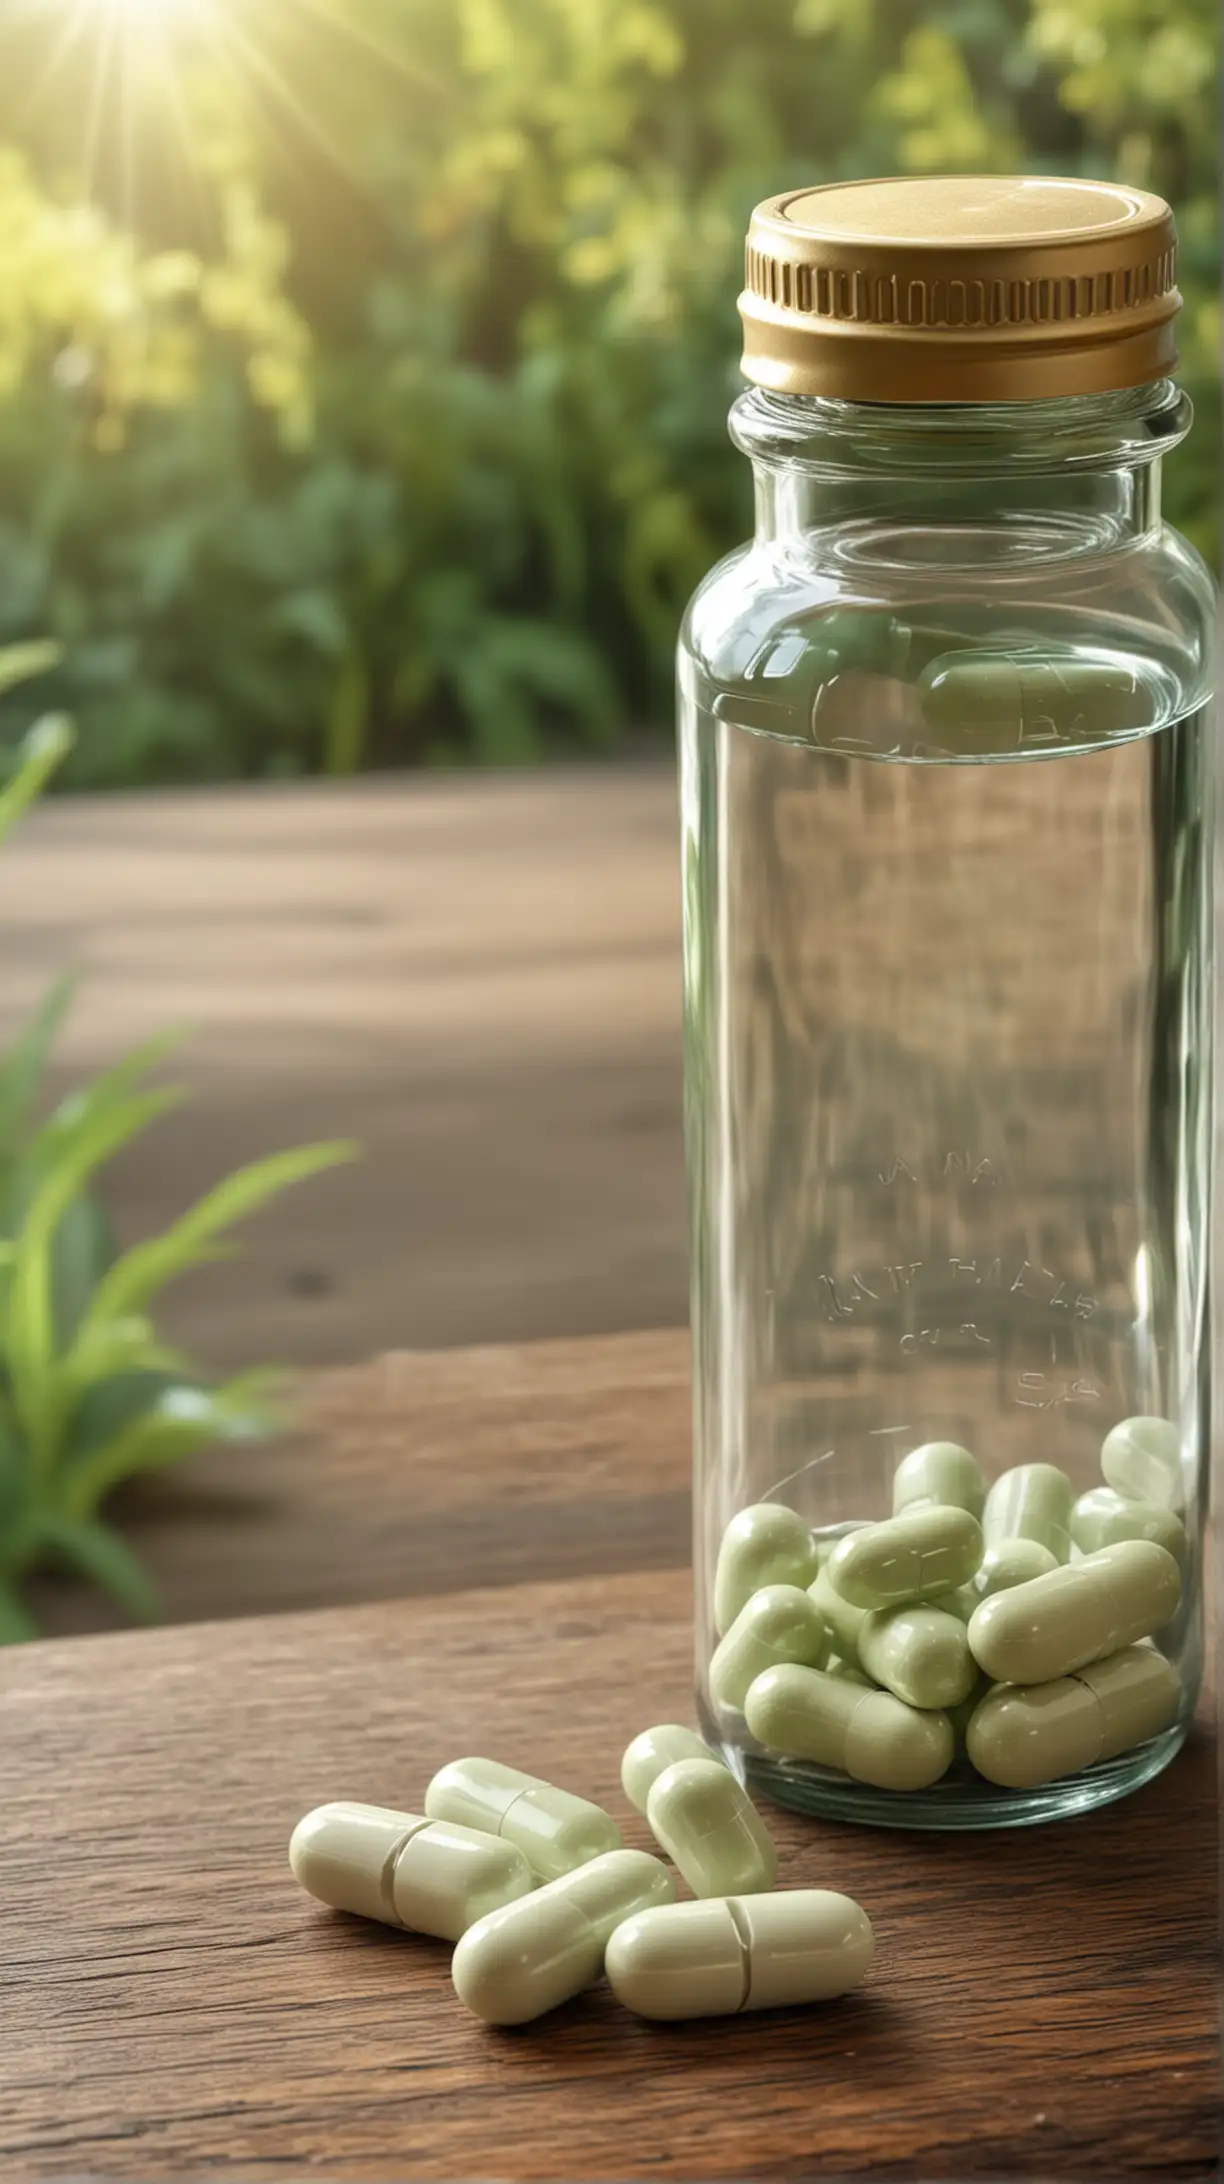 suplement pills on a table,medicine bottle with no label, reseda luteola plantation background, 4k, HDR, hyper-realistic